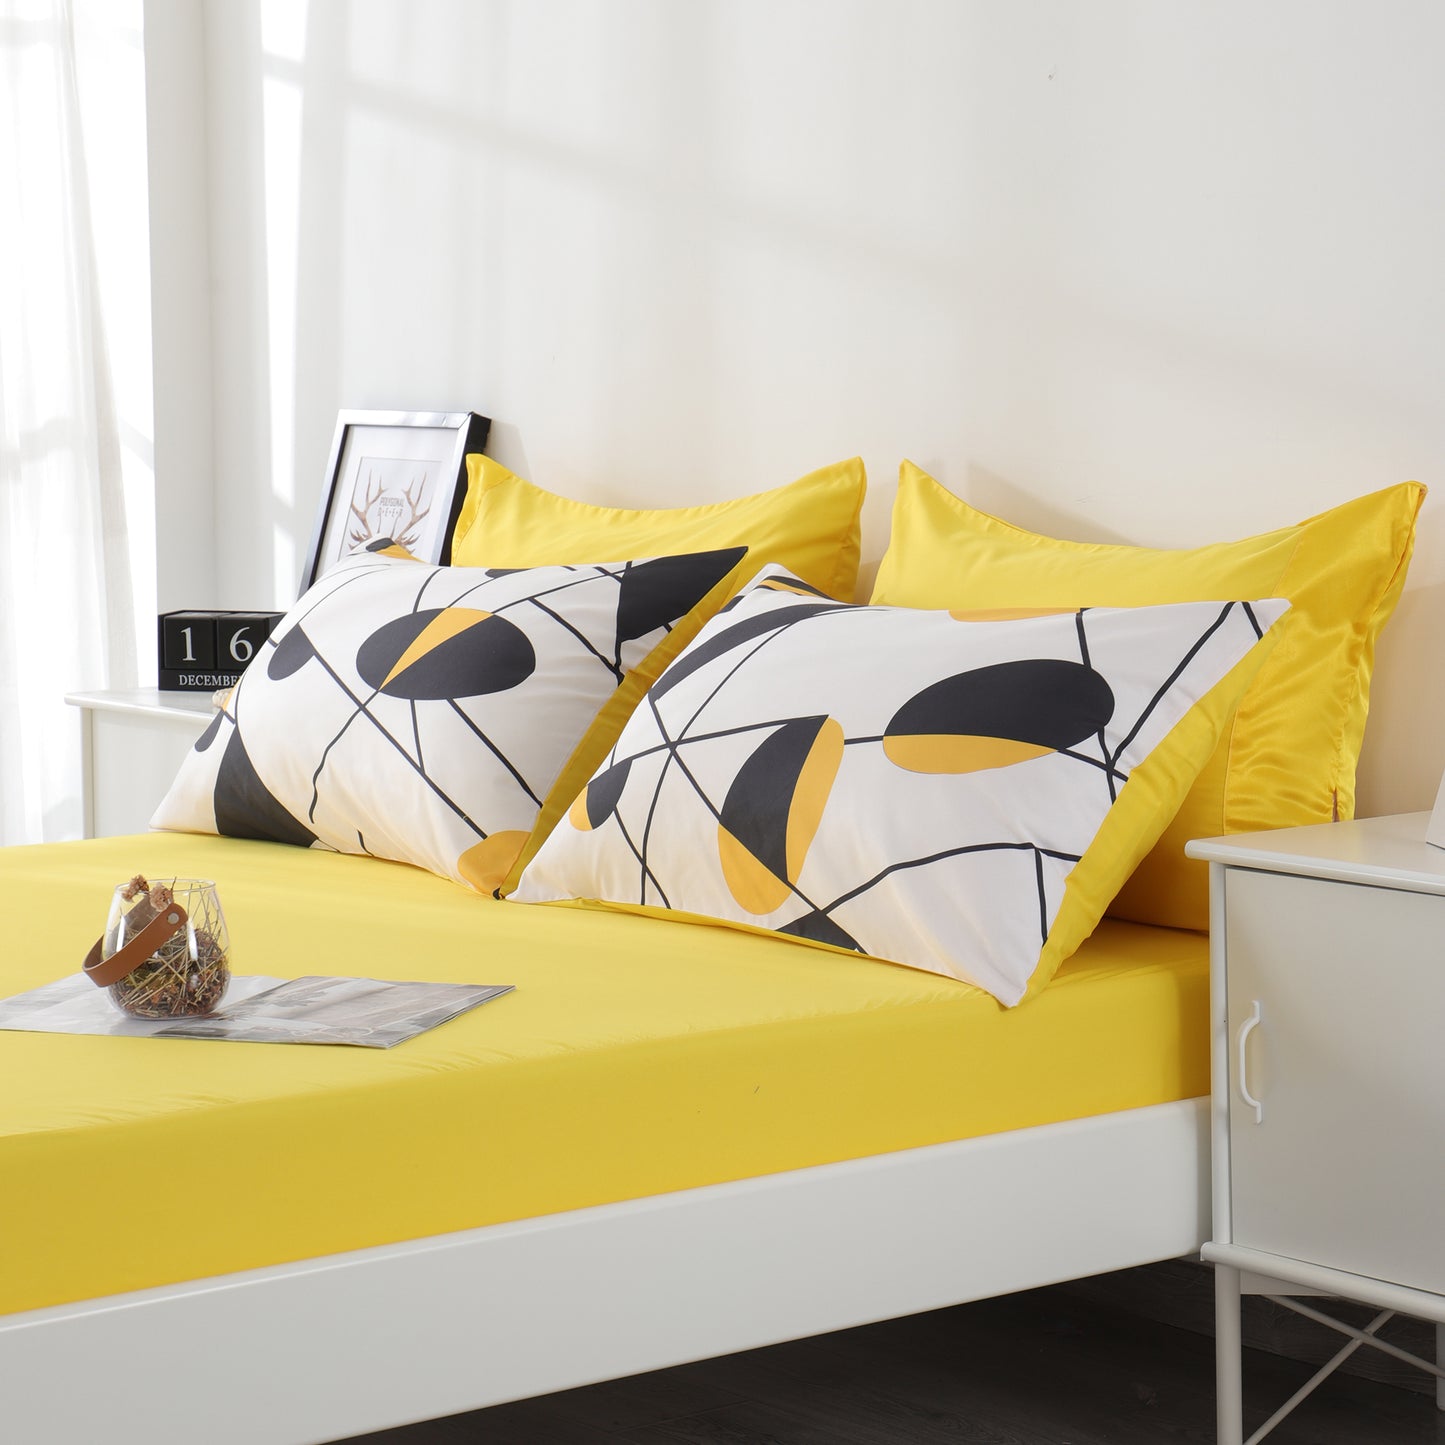 6 Piece Bed Sheet set-Yellow and black pattern